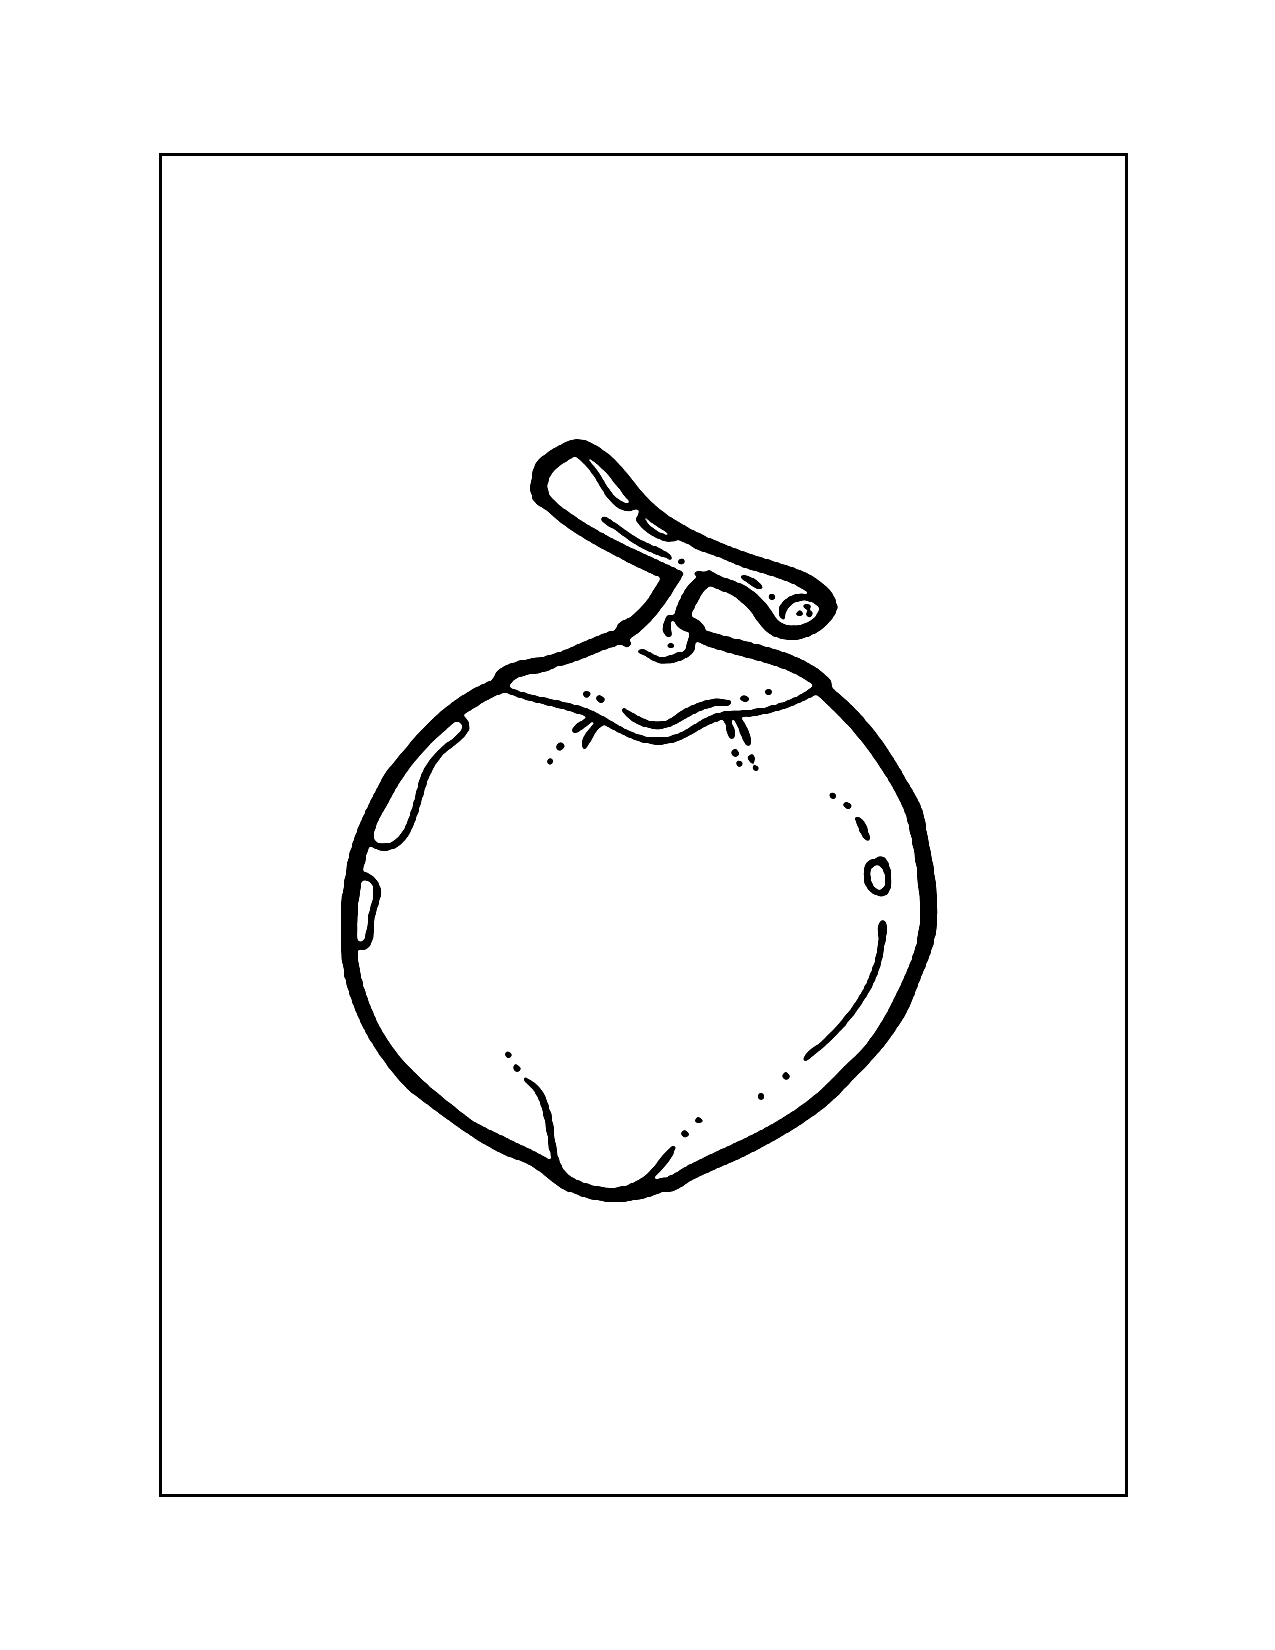 Coconut Hanging From Branch Coloring Page